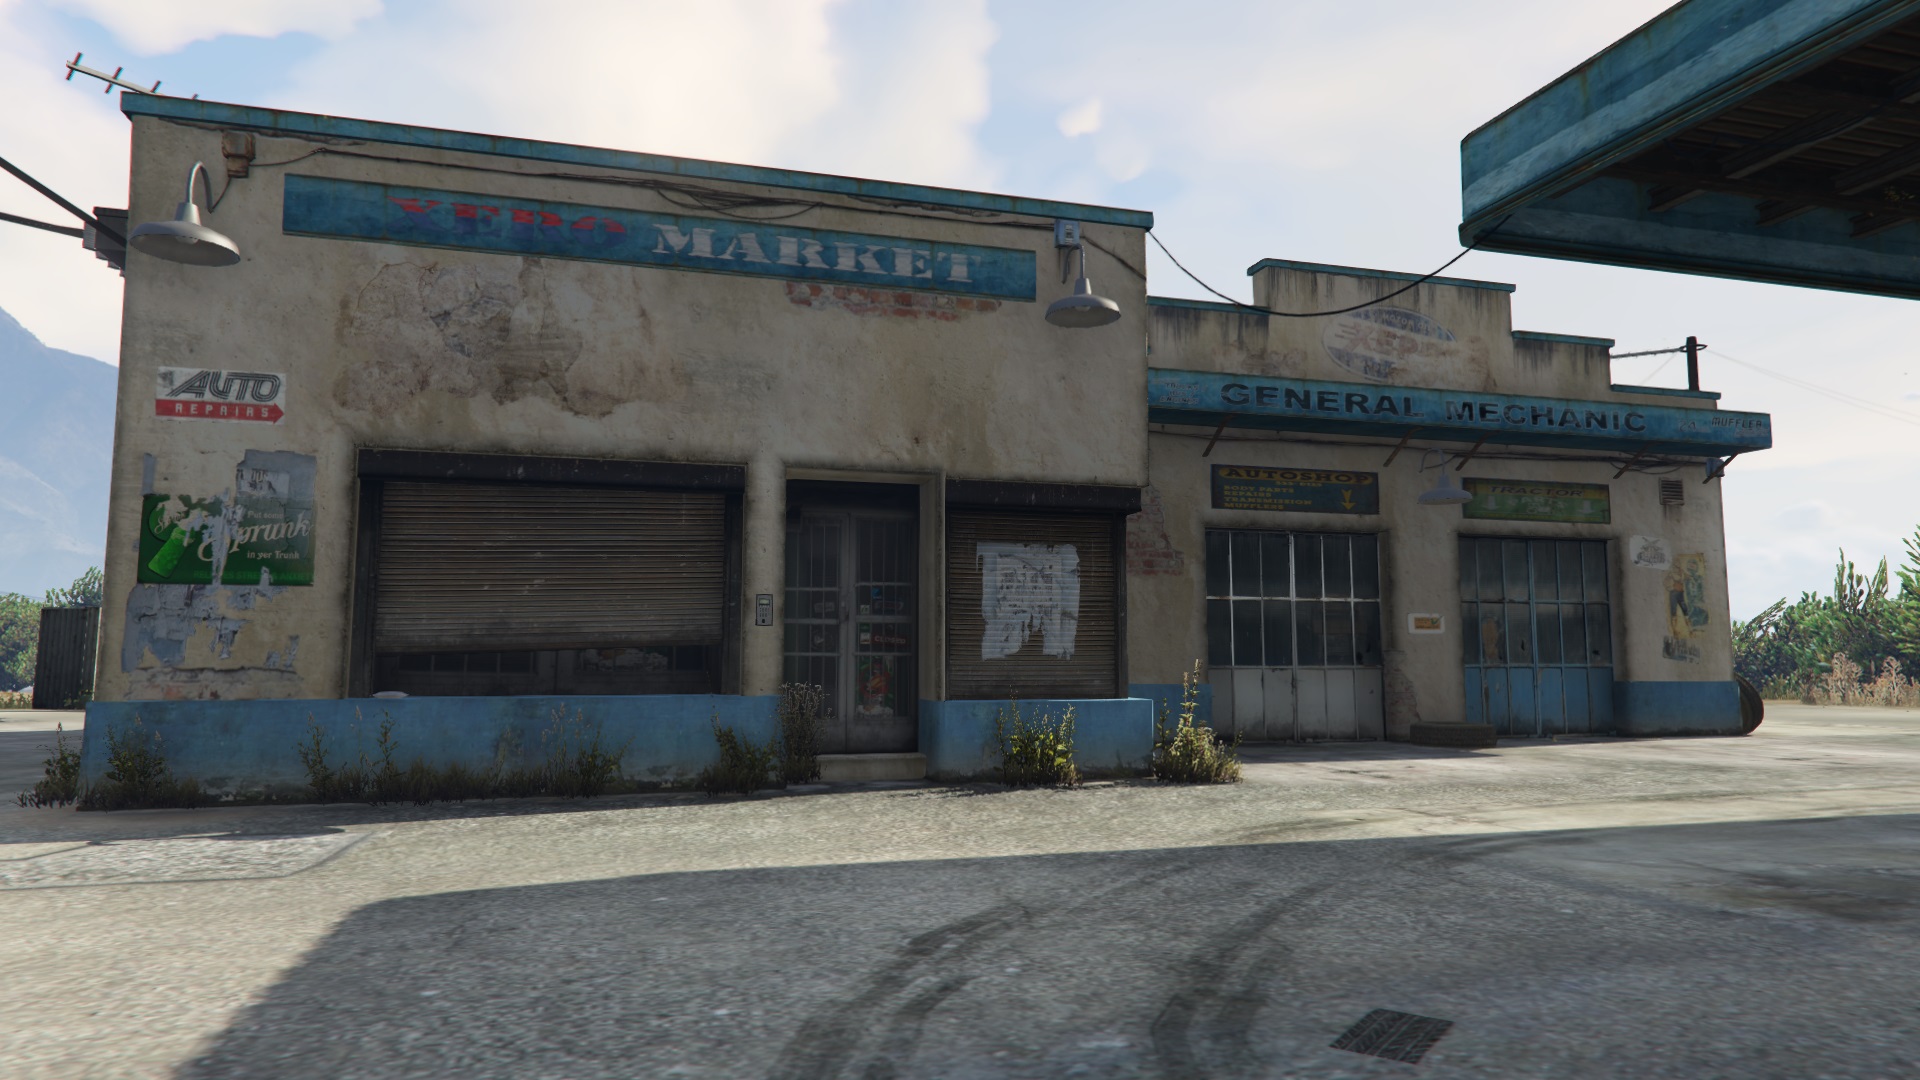 GTA V: How To Buy Clubhouse